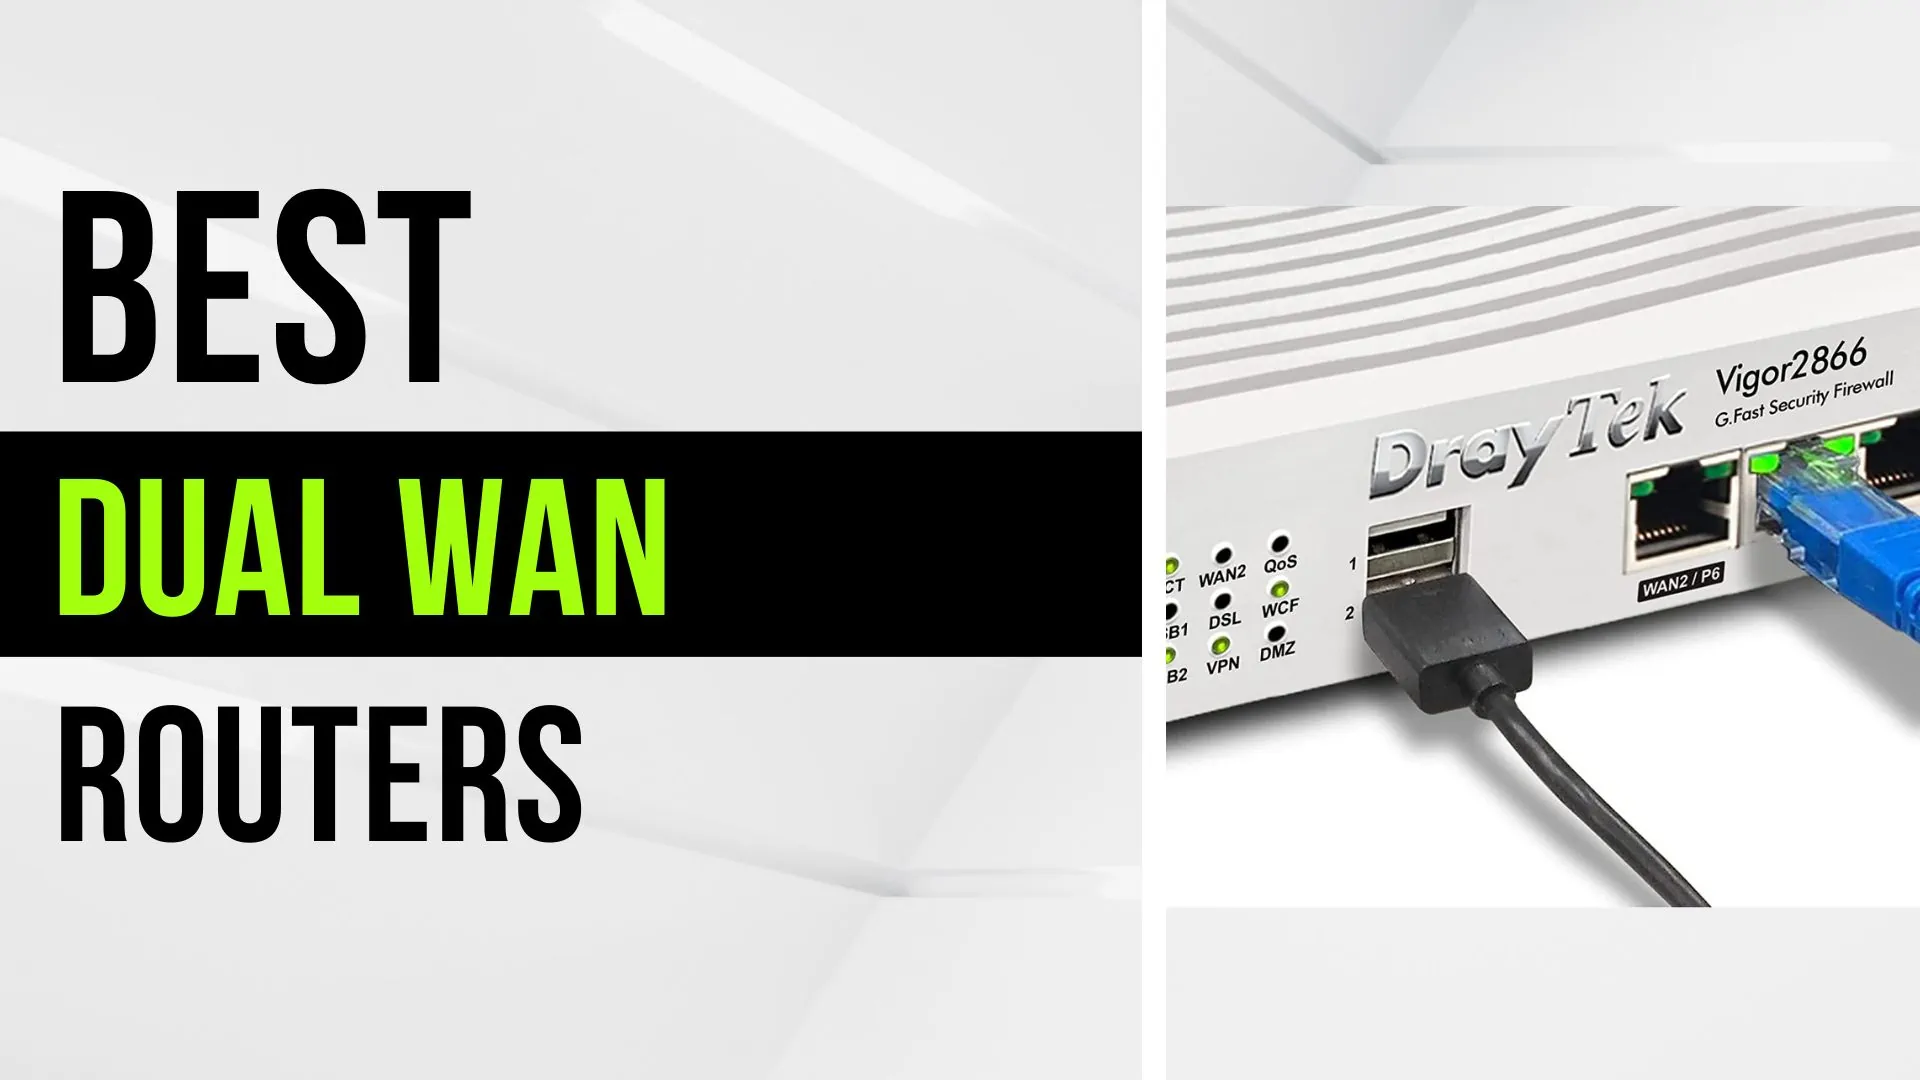 Best Dual Wan Routers – Multi Wan Load Balancing & Failover Routers